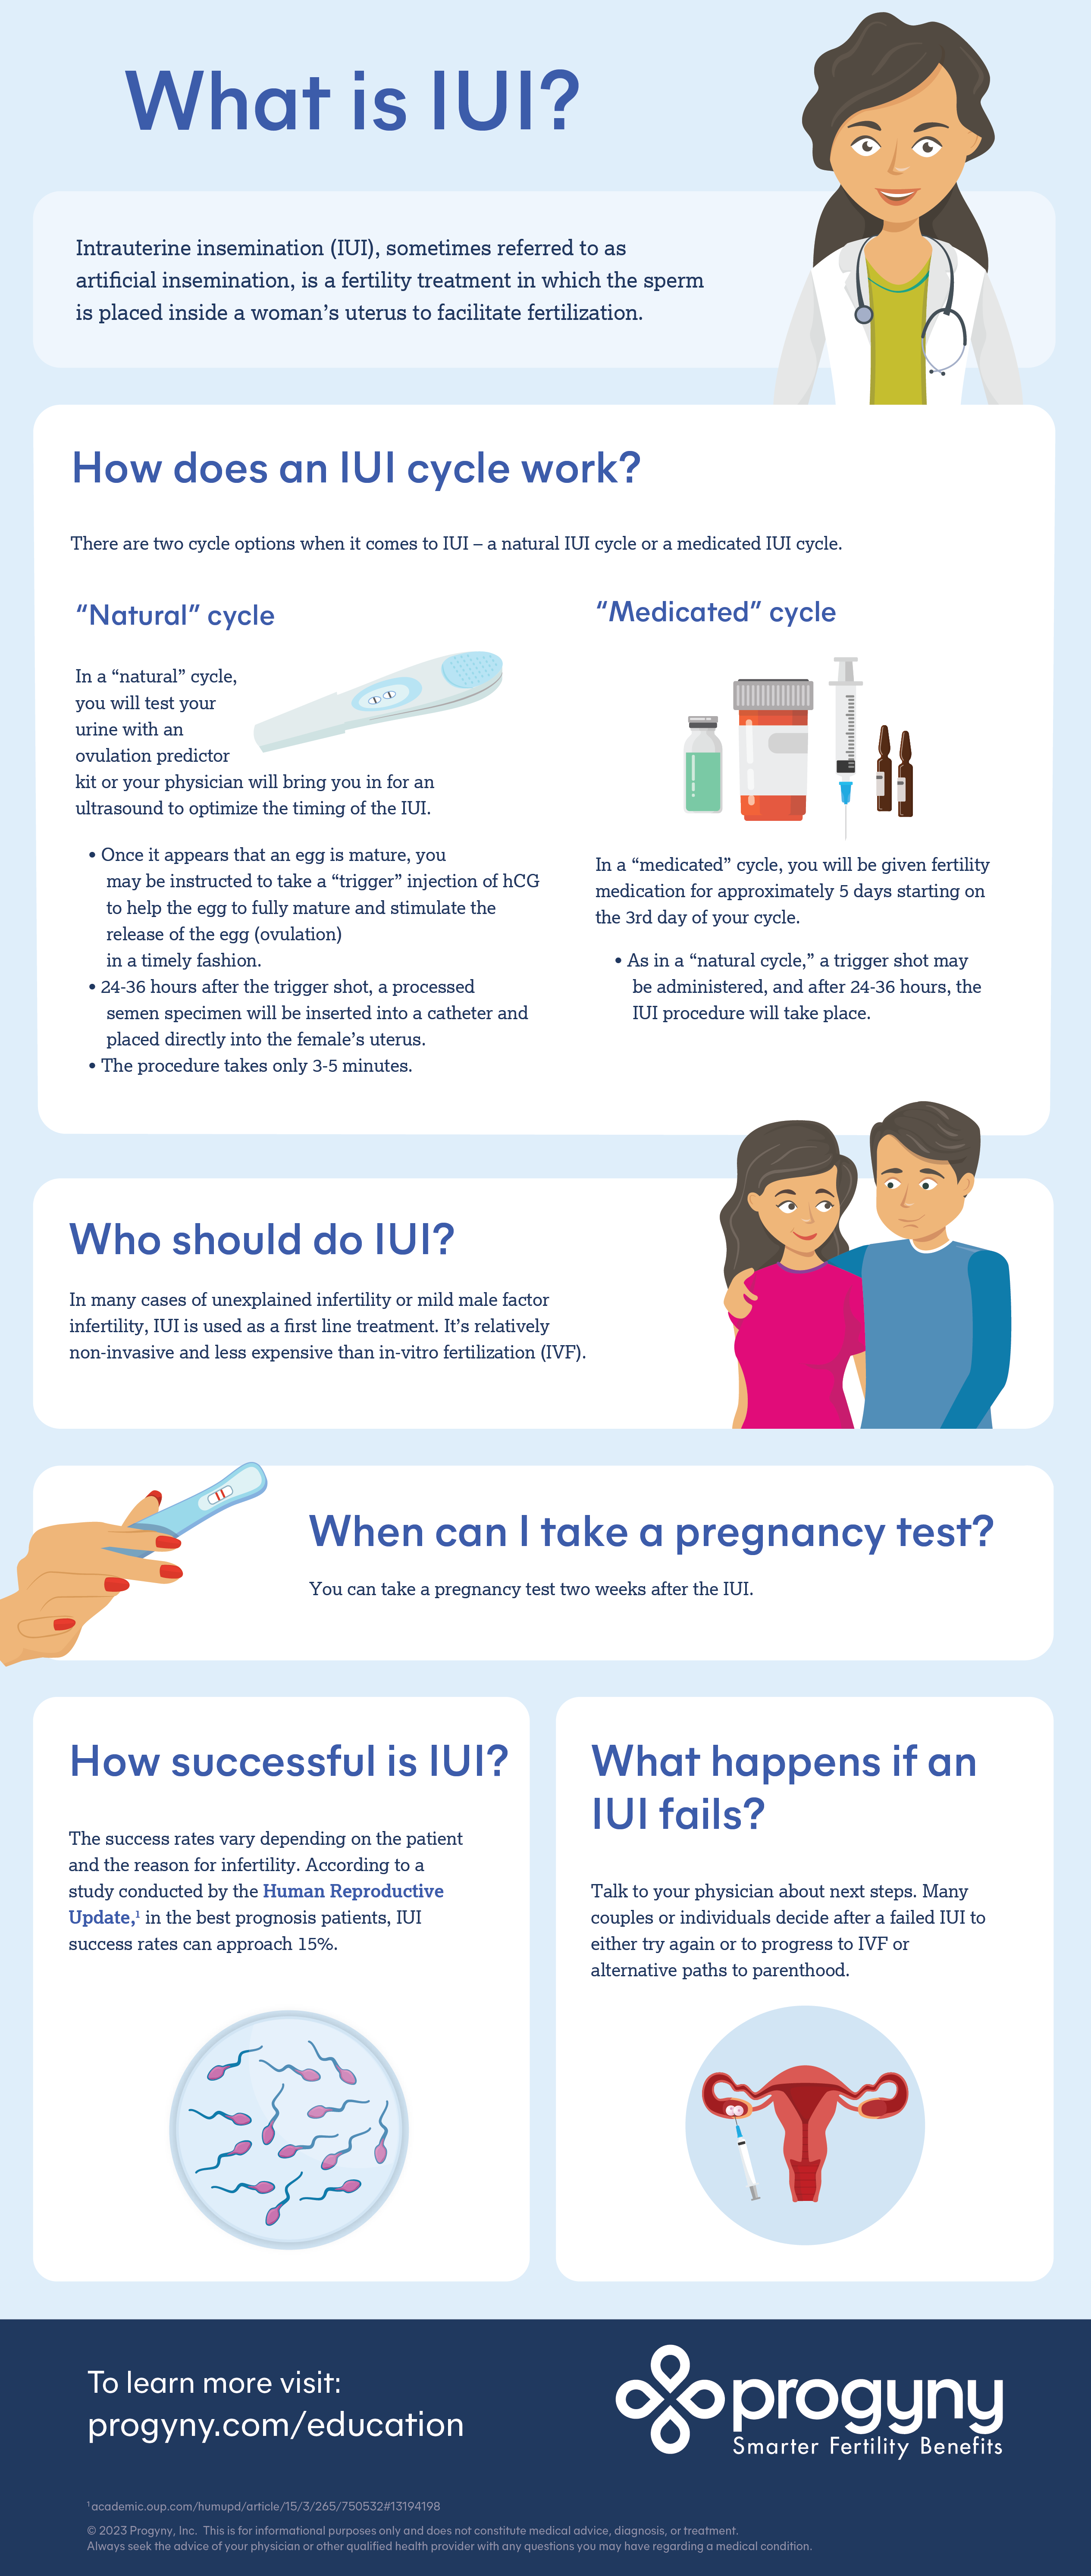 Illustrated infographic explaining what is IUI, how it works, who should do it, and markers for success